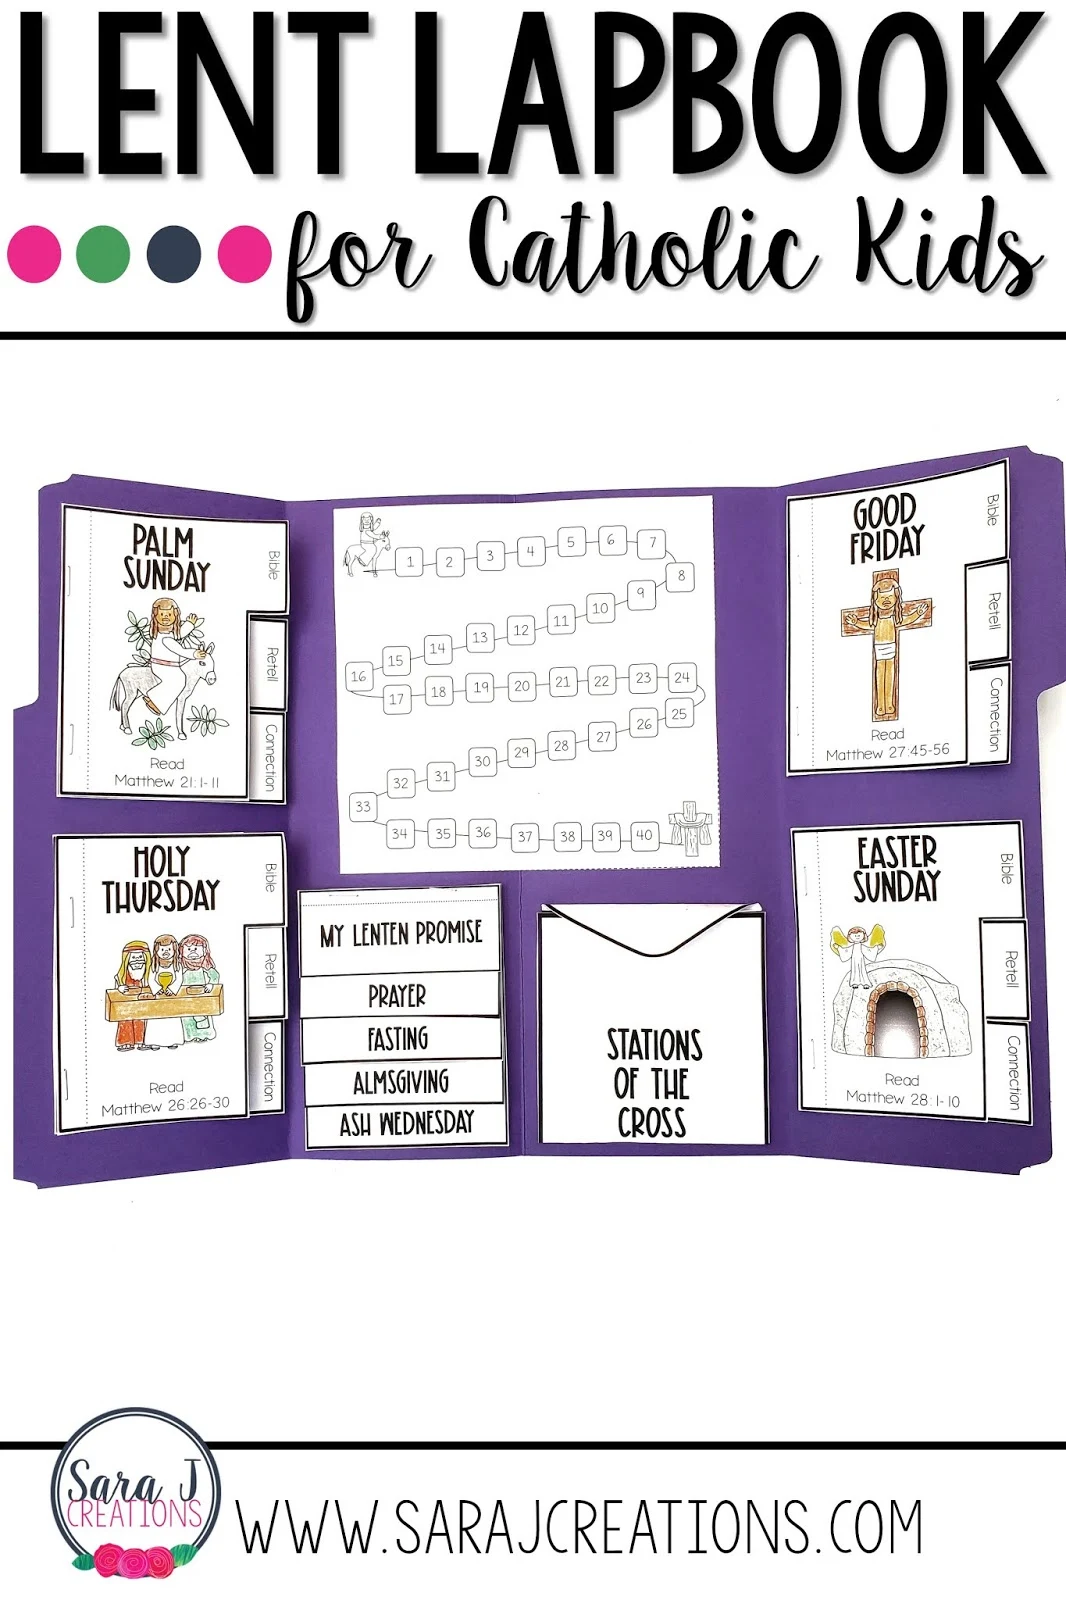 Use this Catholic Lent lapbook to help your students grow closer to Jesus through scripture and Catholic traditions & devotions.